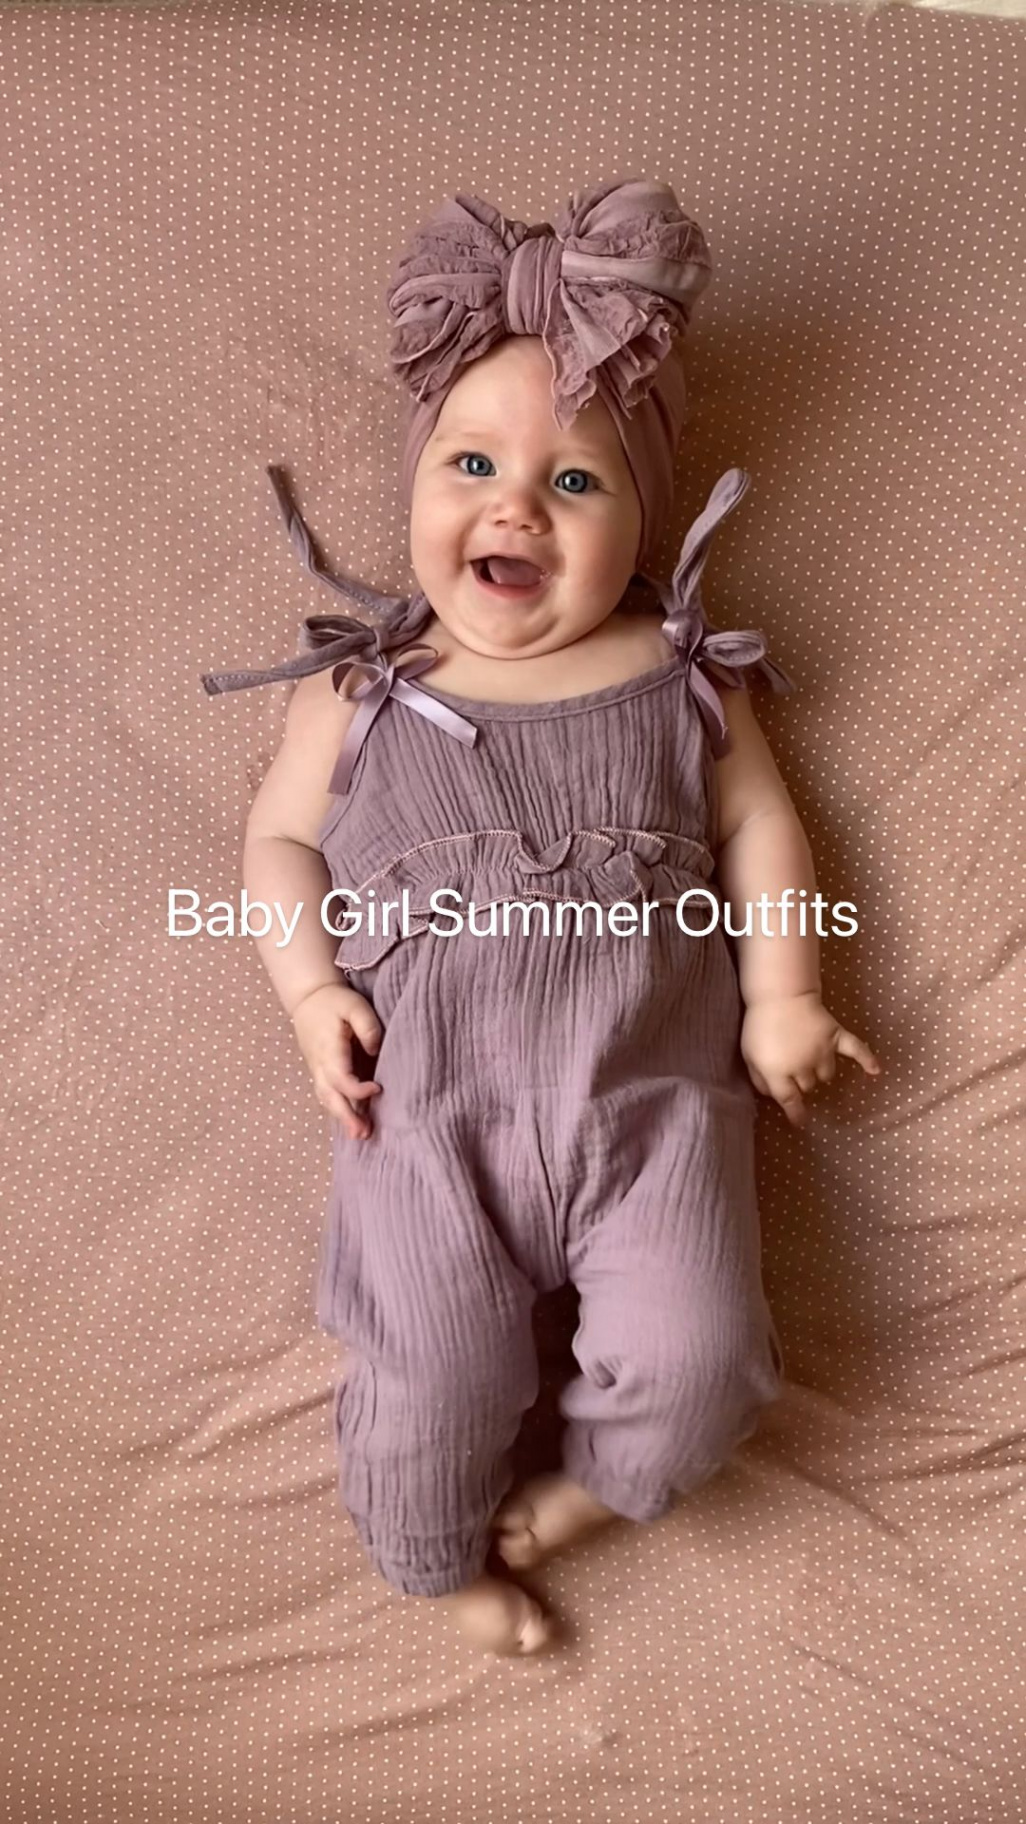 Baby Girl Summer Outfits